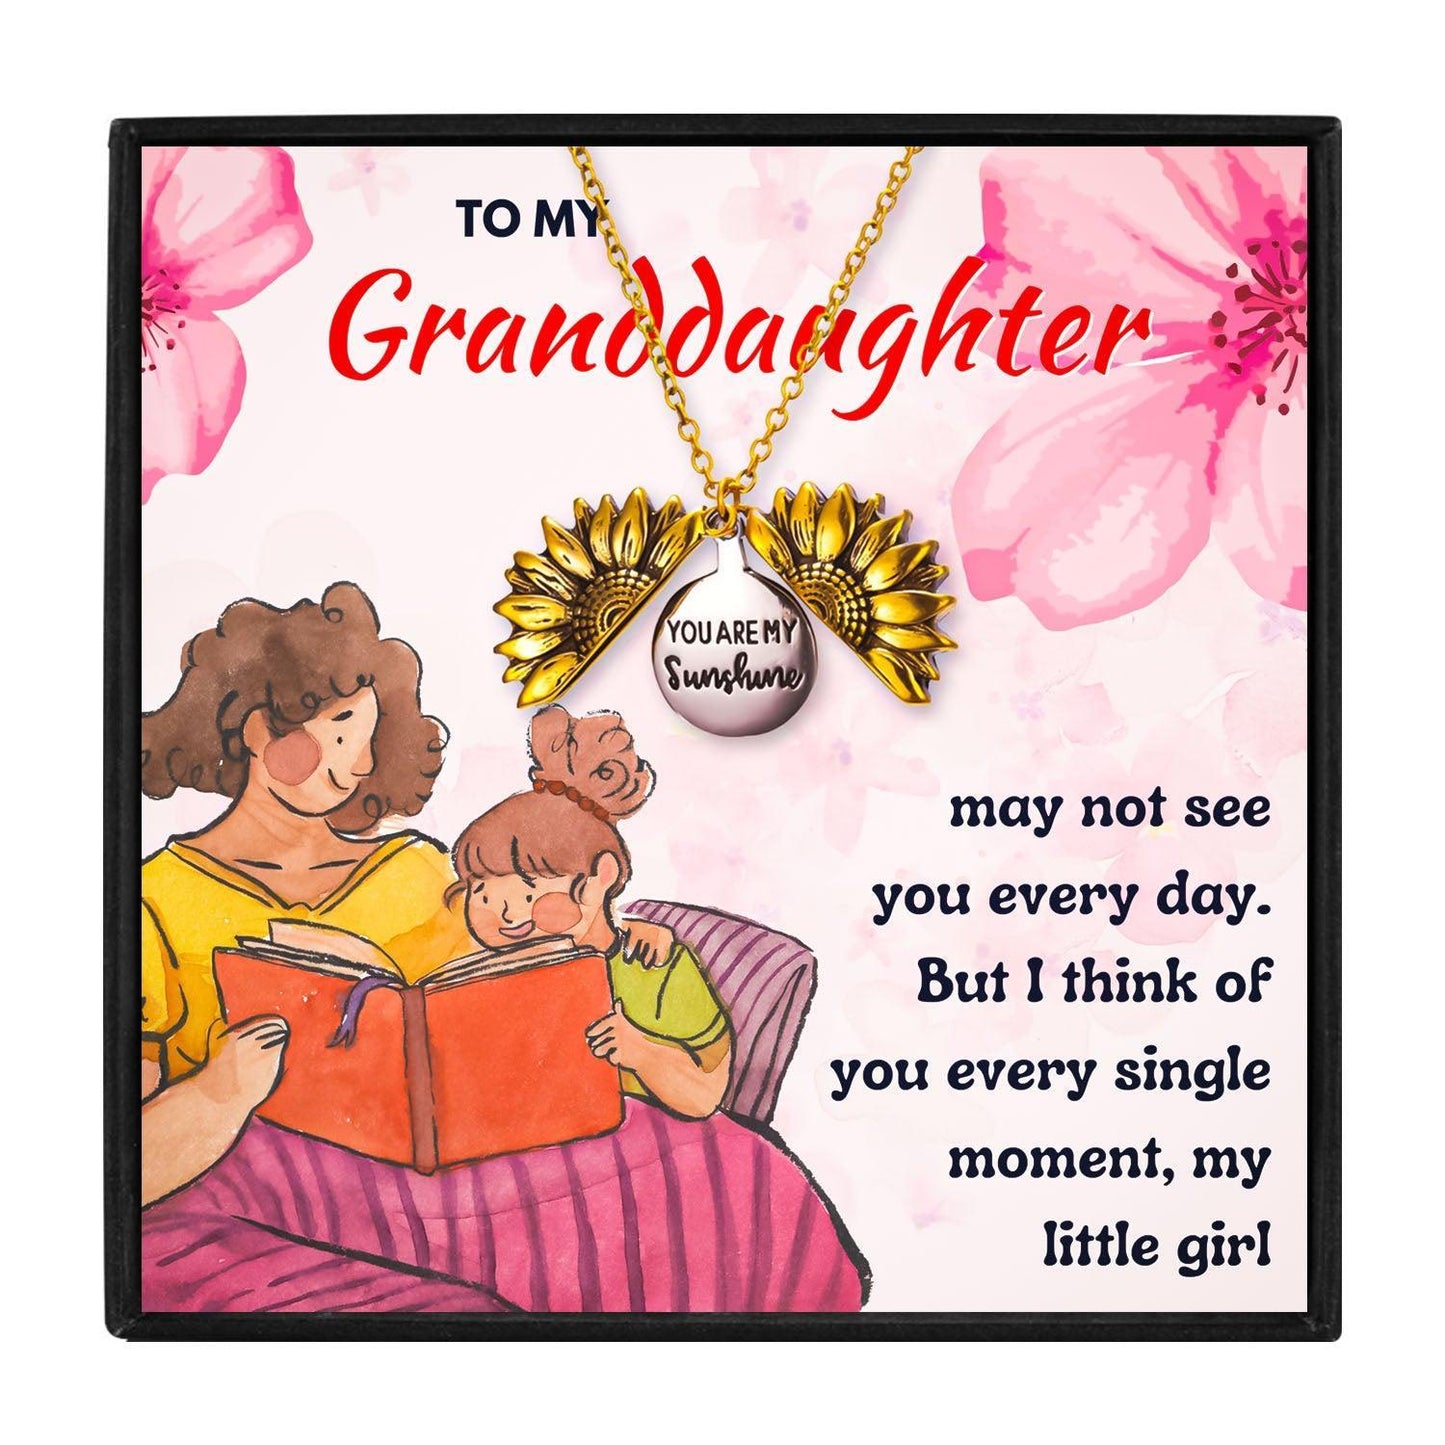 Thoughtful Gifts For Granddaughter From Nana for Christmas 2023 | Thoughtful Gifts For Granddaughter From Nana - undefined | granddaughter gift, granddaughter gifts from nana, granddaughter necklace from grandma, grandma granddaughter necklace, personalized granddaughter jewelry, to my granddaughter necklace | From Hunny Life | hunnylife.com